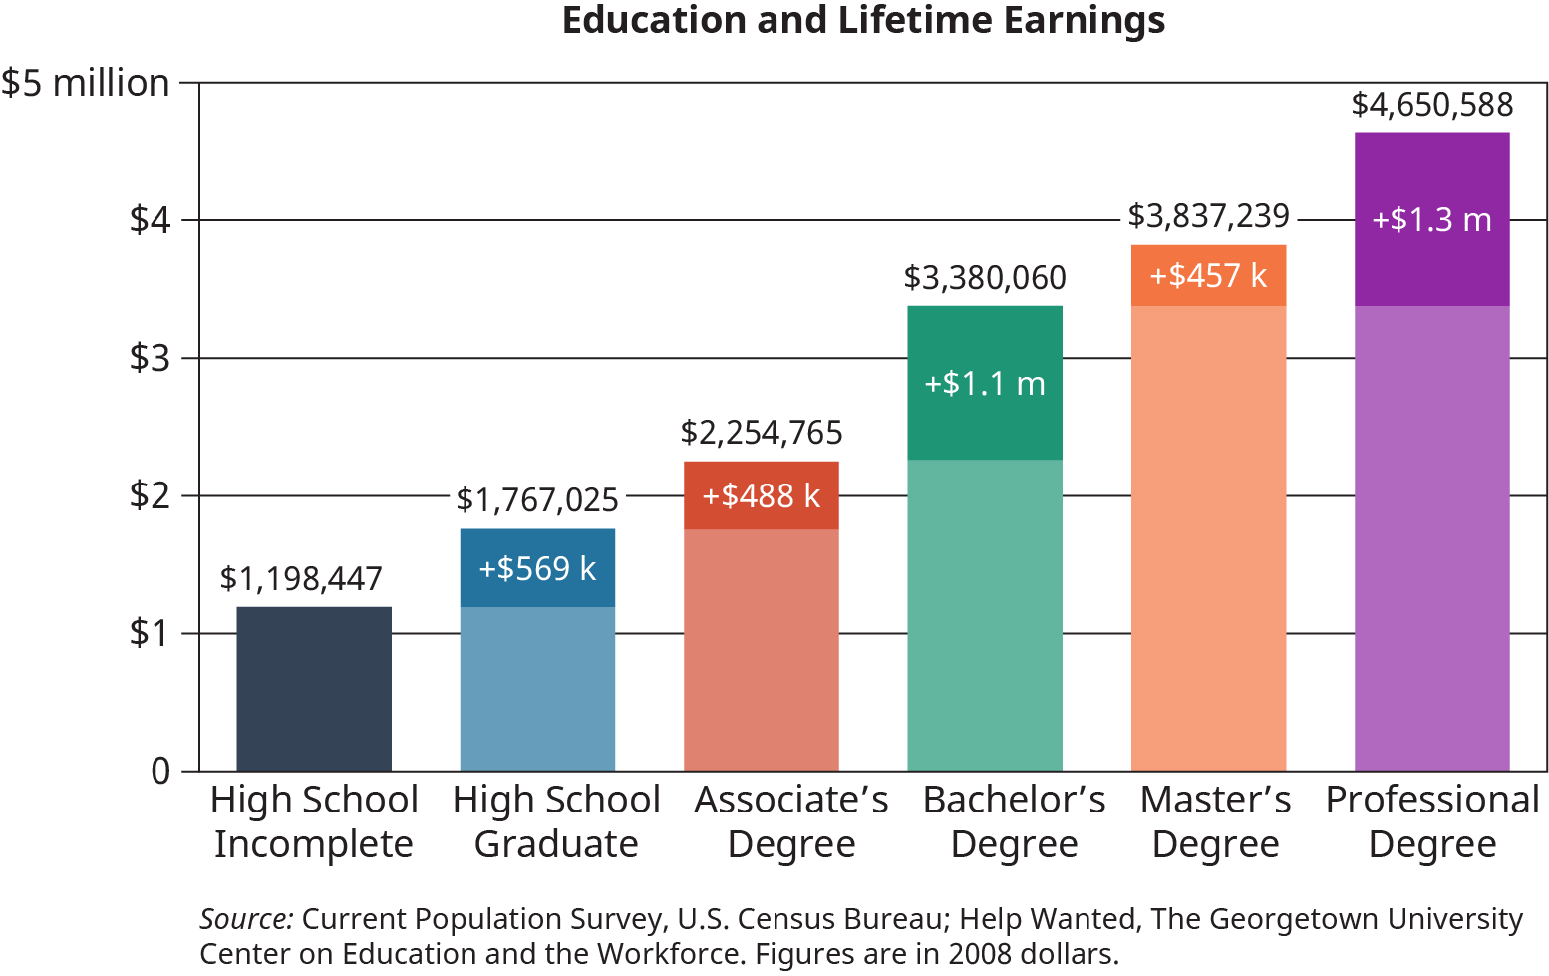 A vertical bar graph plots the relationship between the level of education of students and their lifetime earnings.